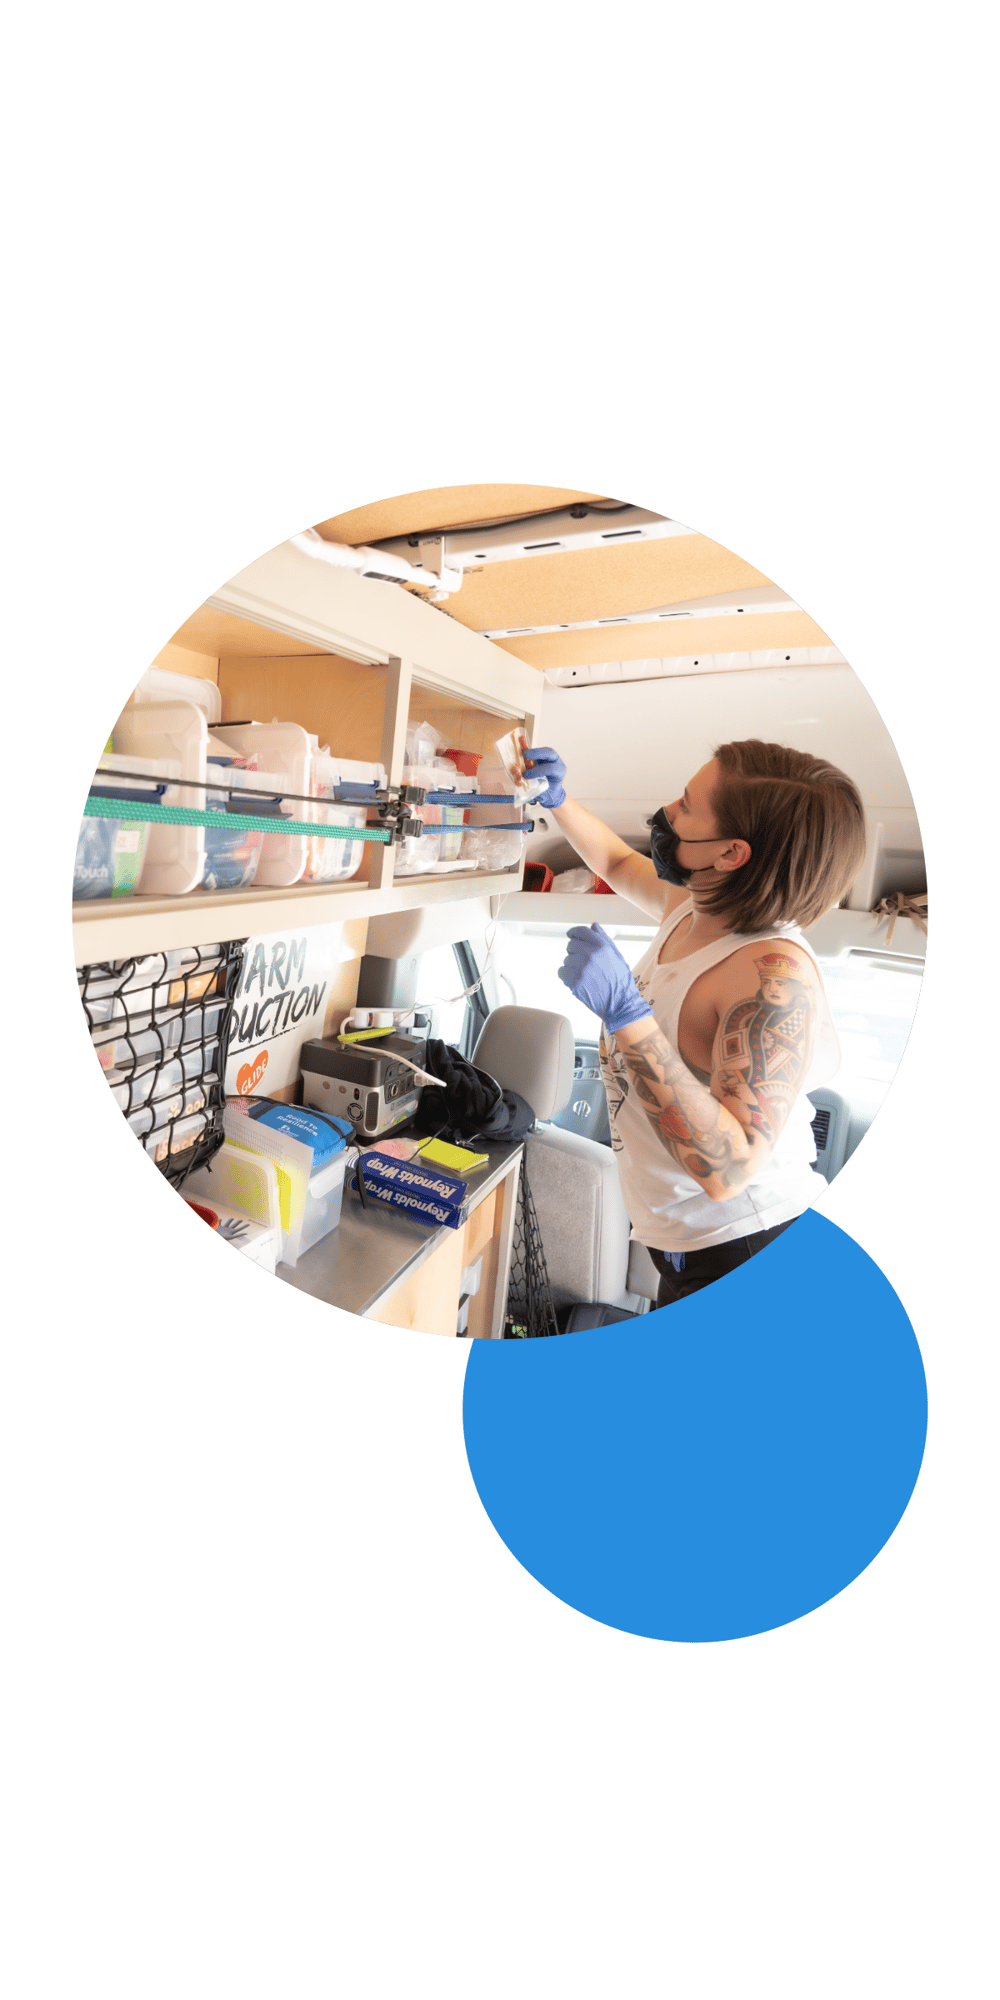 This is an image of a person looking at medical supplies inside of a medical vehicle. The person is wearing a mask, and blue medical gloves. The picture is placed inside of a circular frame. Behind the circle frame and placed slightly to the lower left is a medium blue circle.